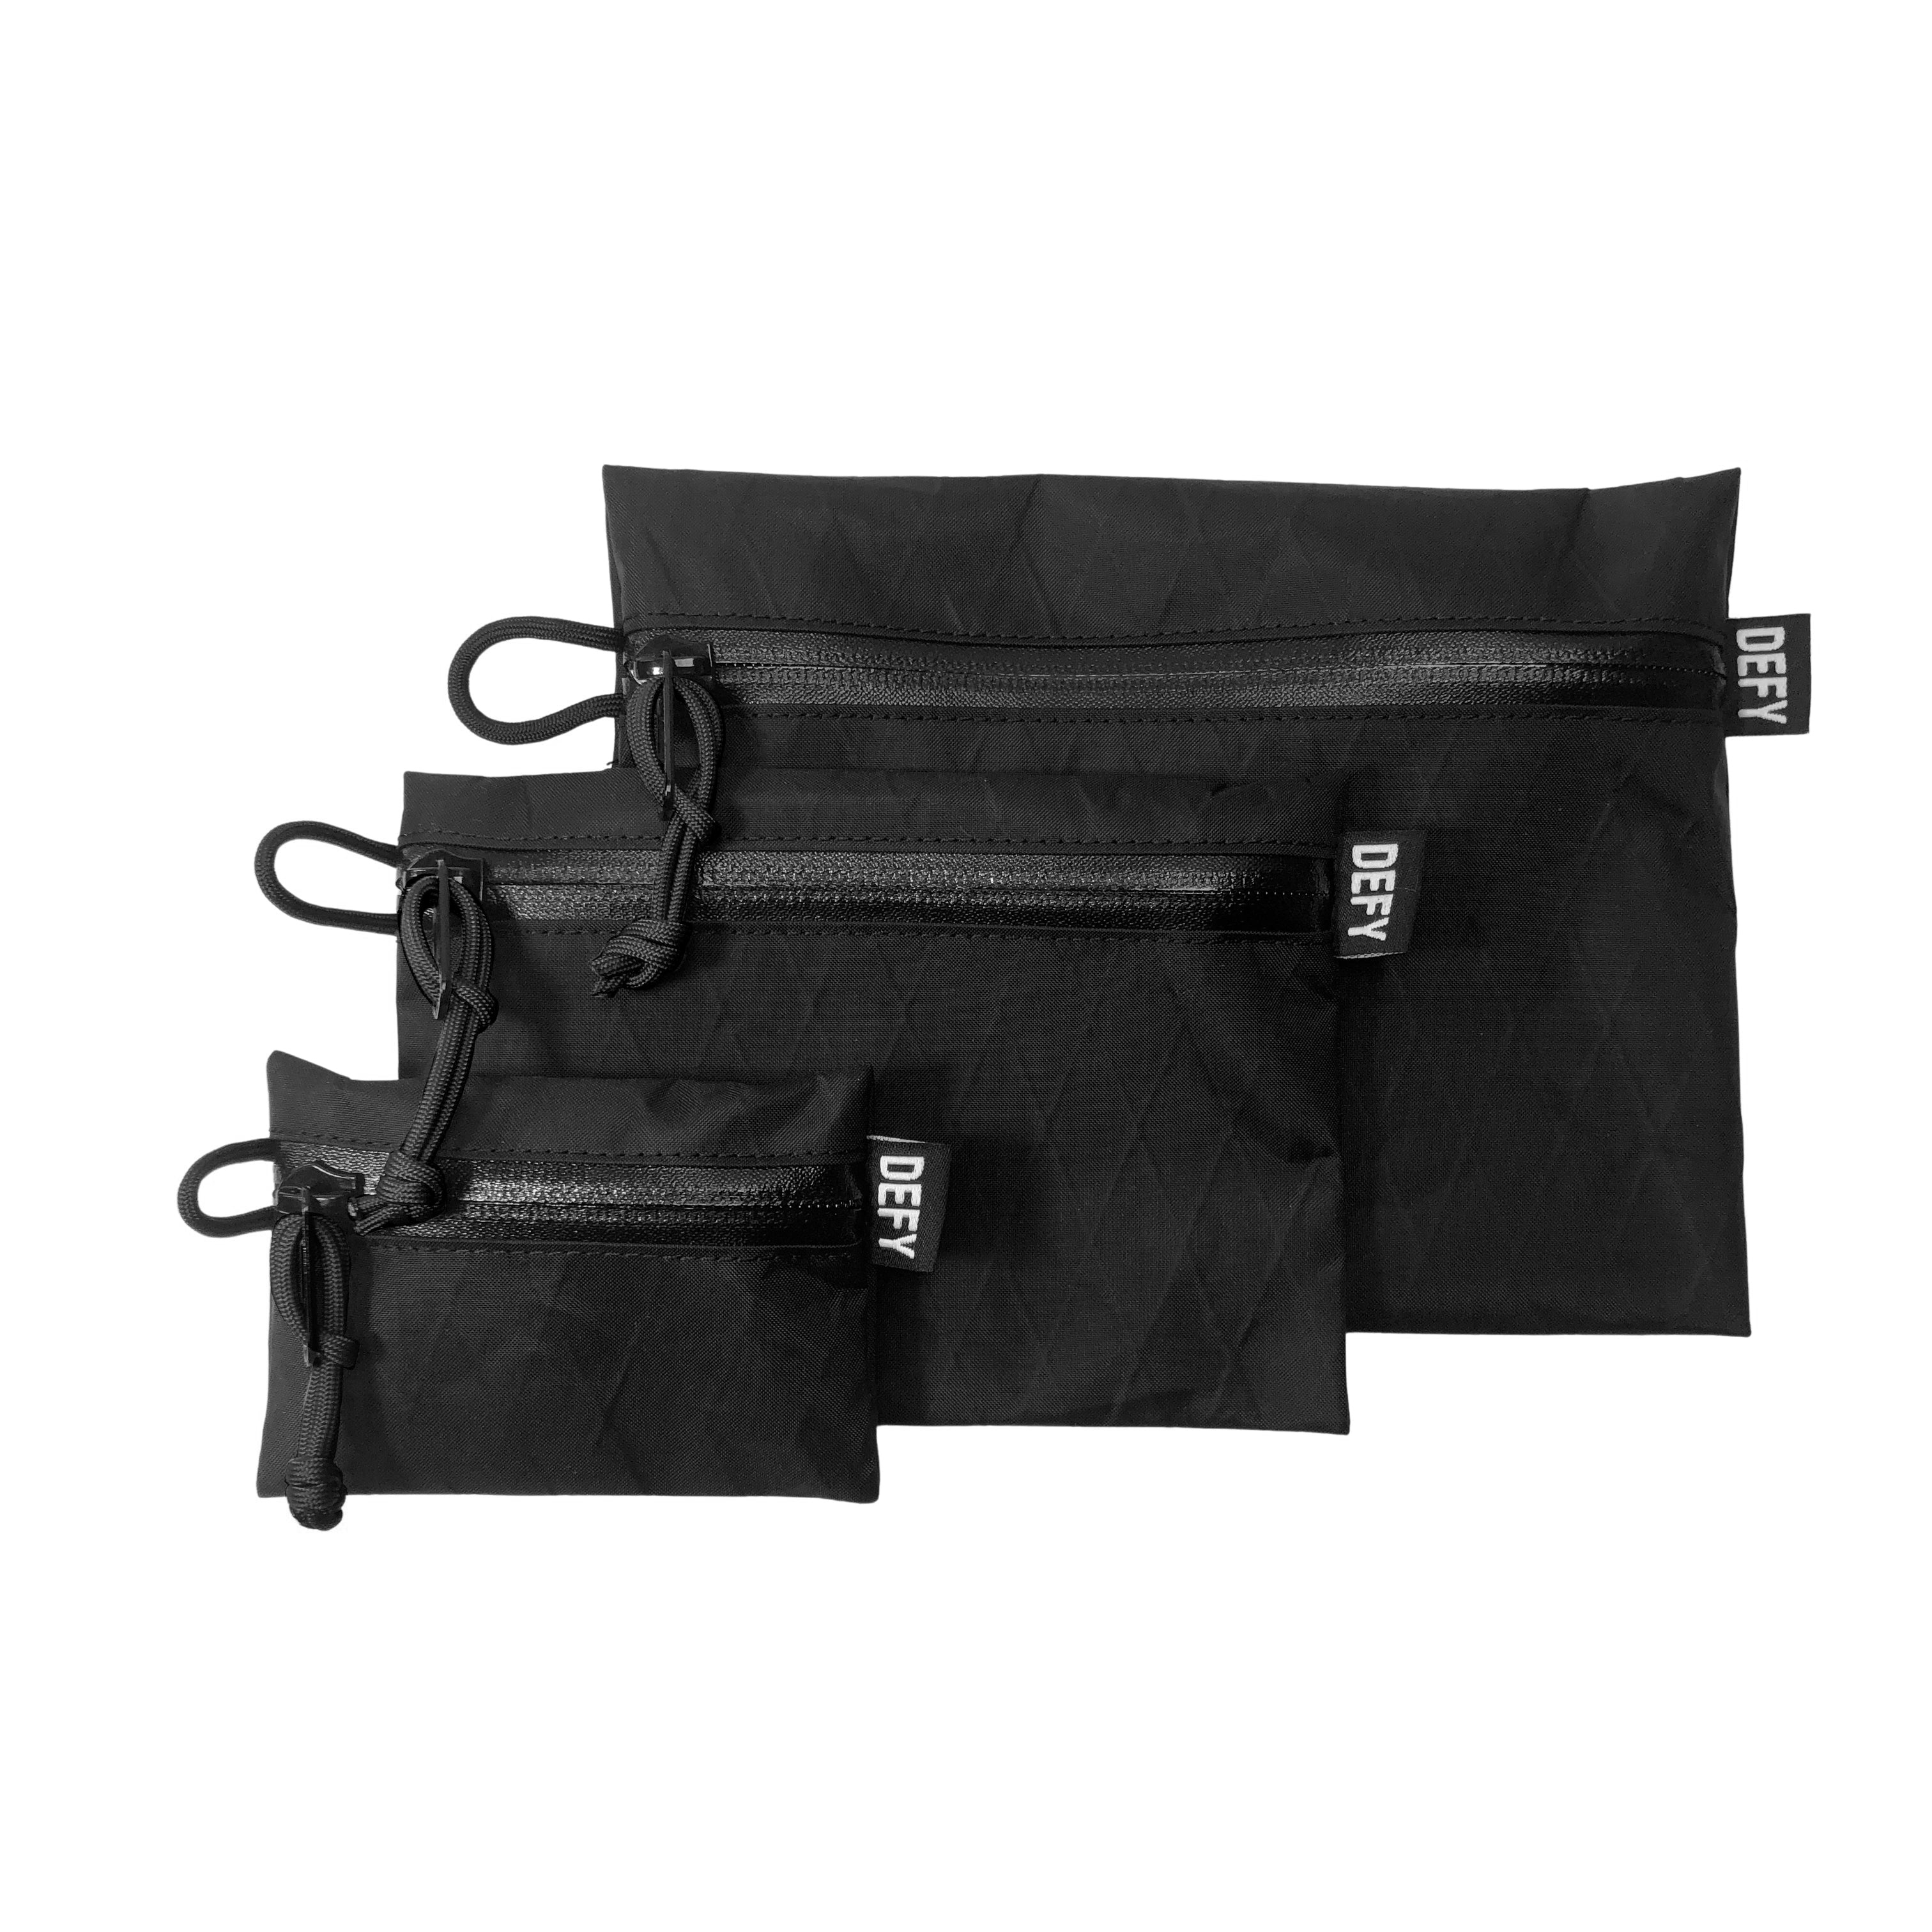 Project Pouch | Black – DEFY